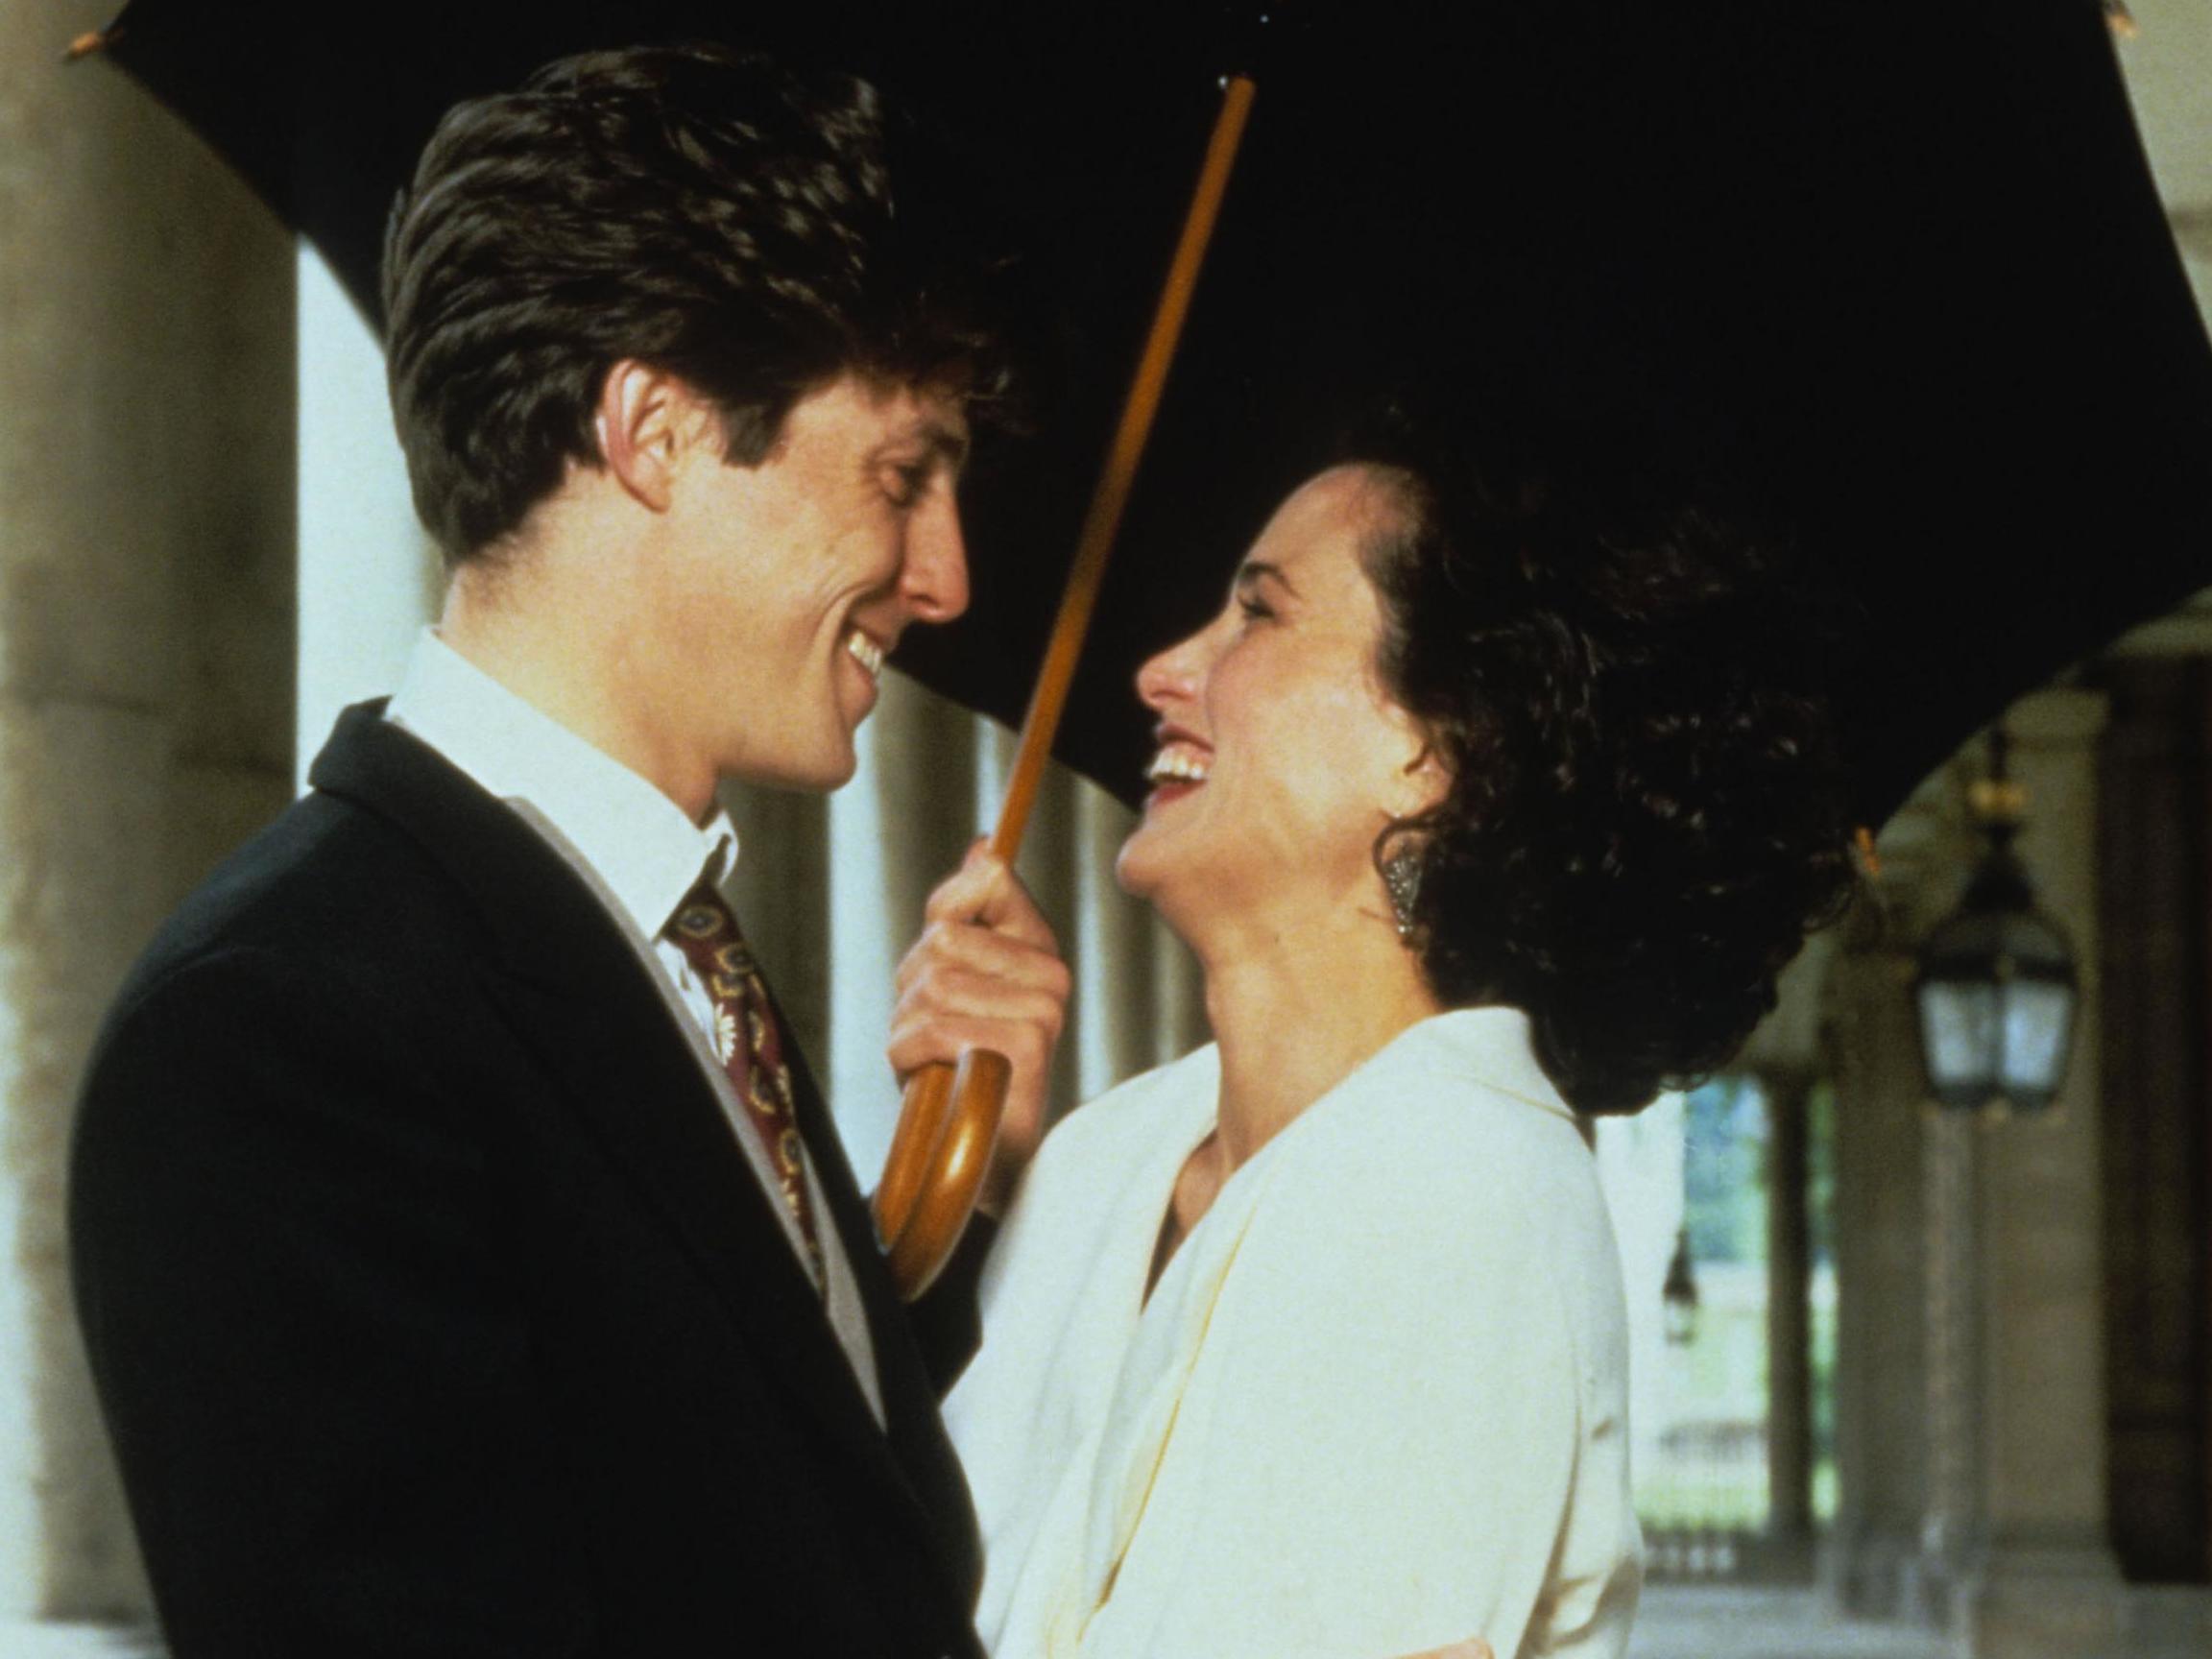 Hugh Grant and Andie MacDowell in ‘Four Weddings and a Funeral’ (Rex)